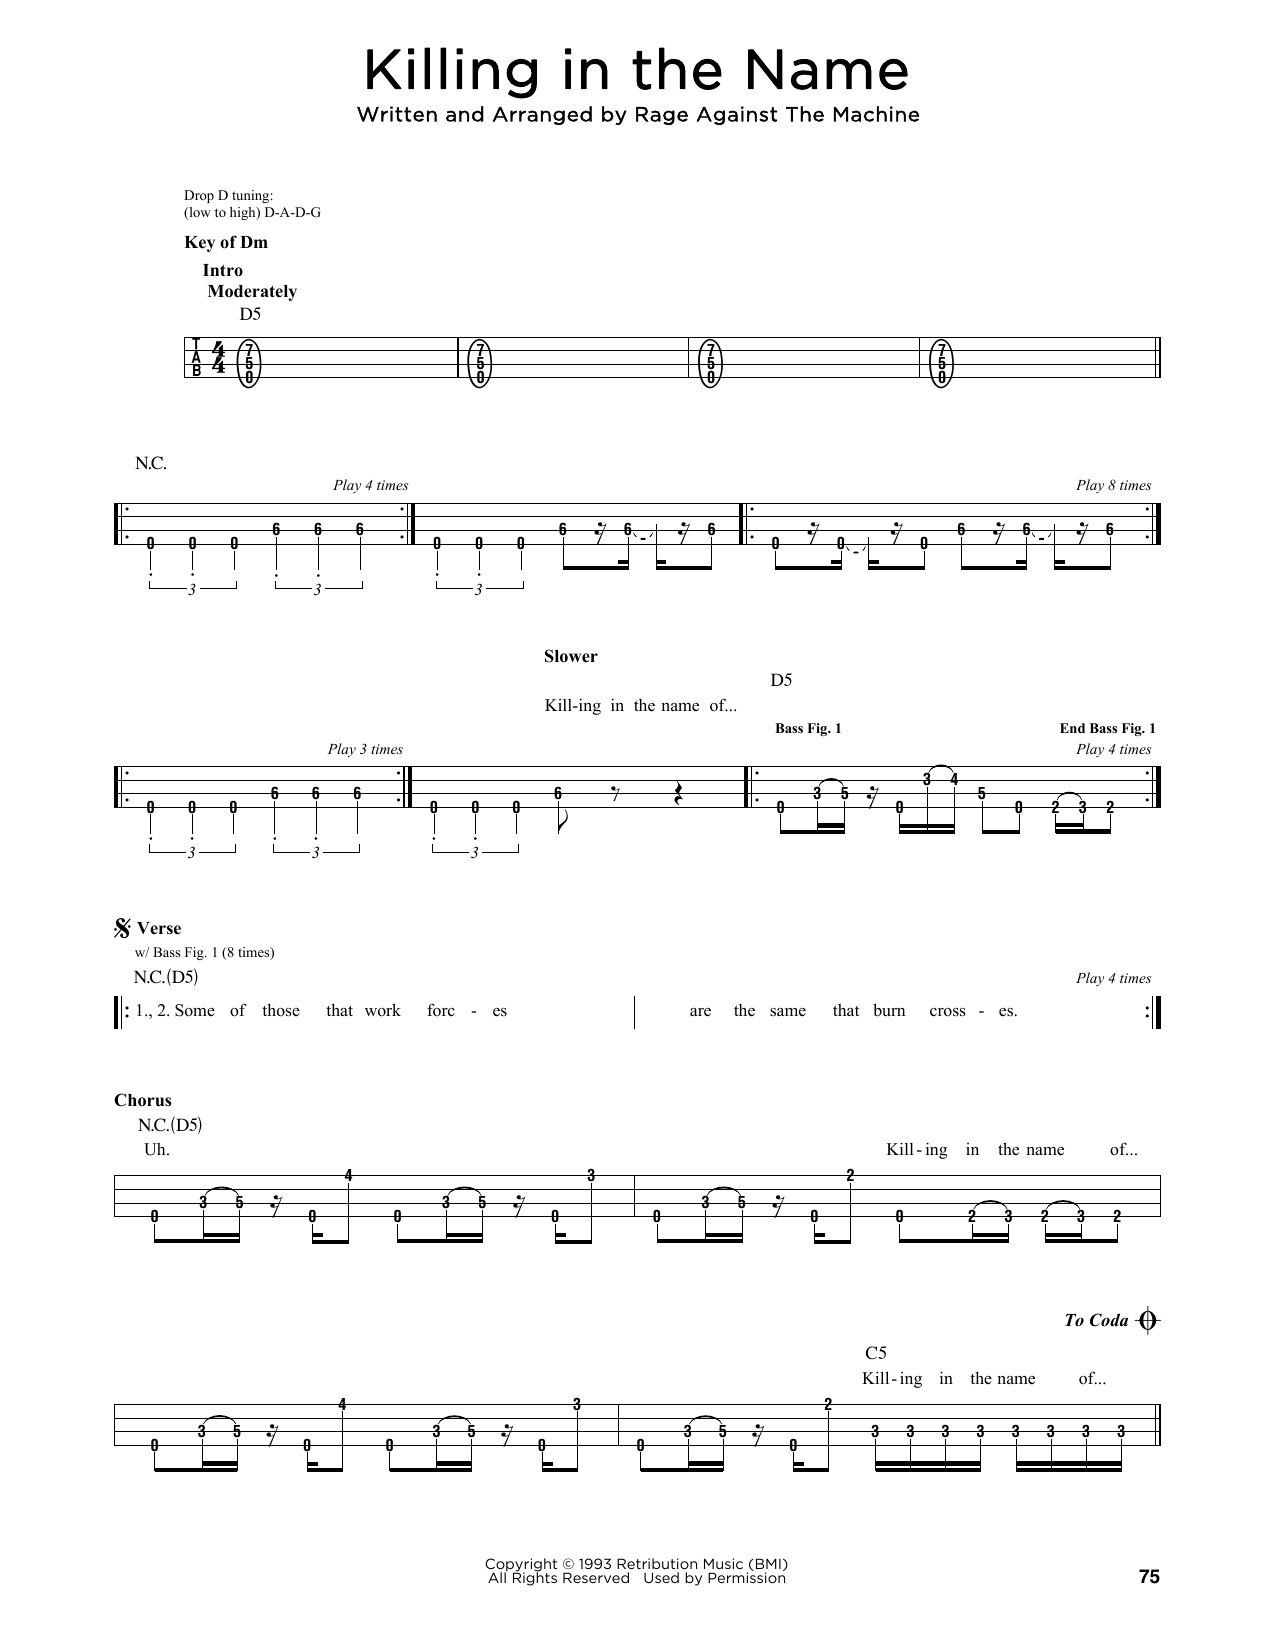 Rage Against The Machine Killing In The Name sheet music notes printable PDF score